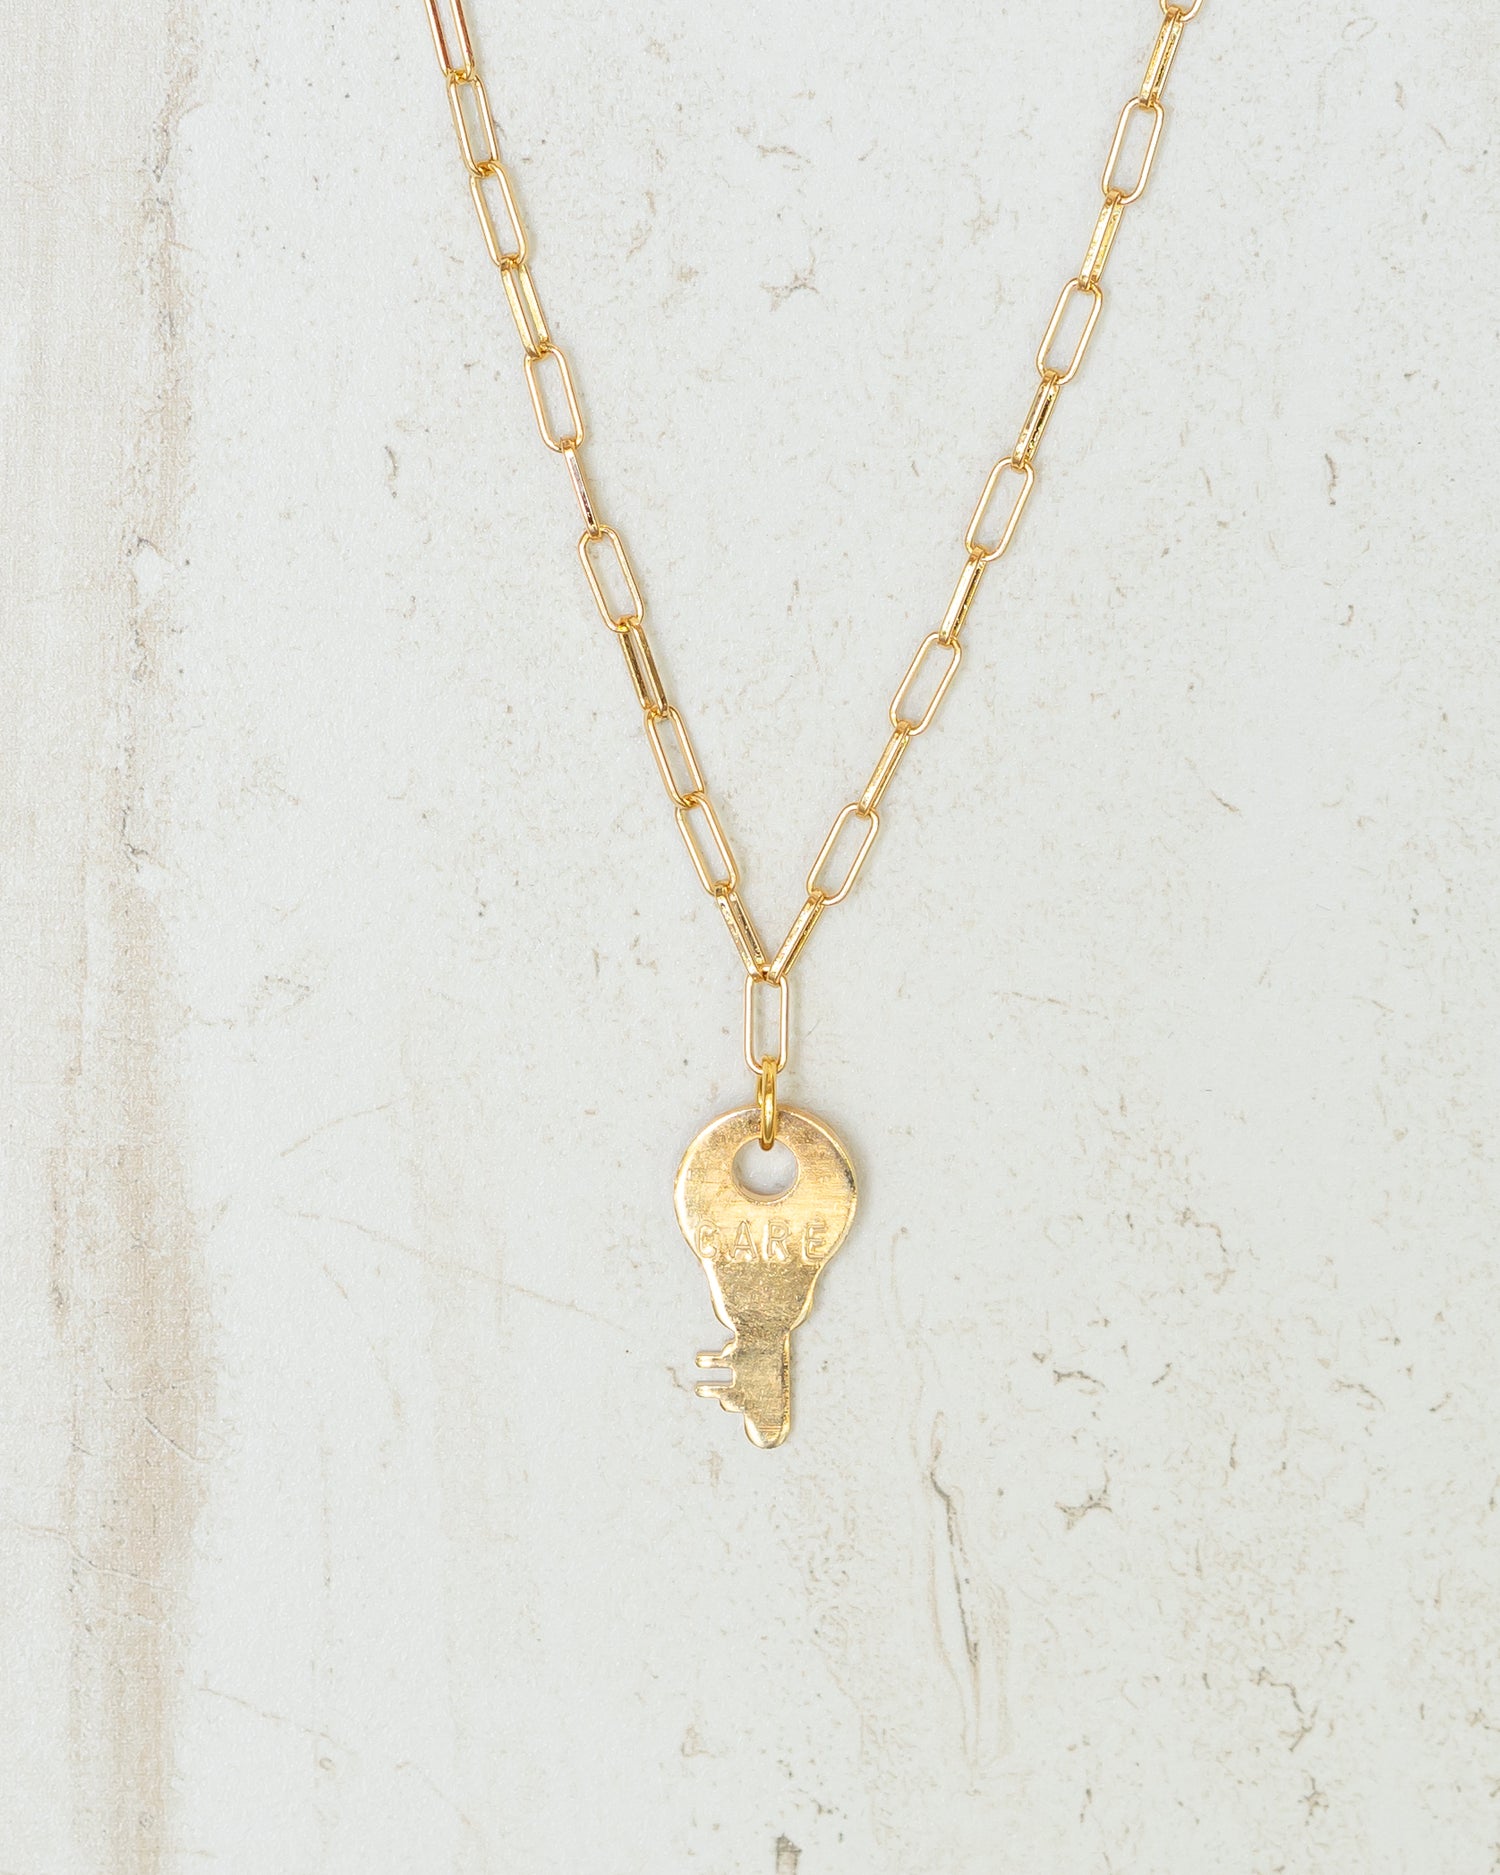 CARE Mini Giving Key Necklace